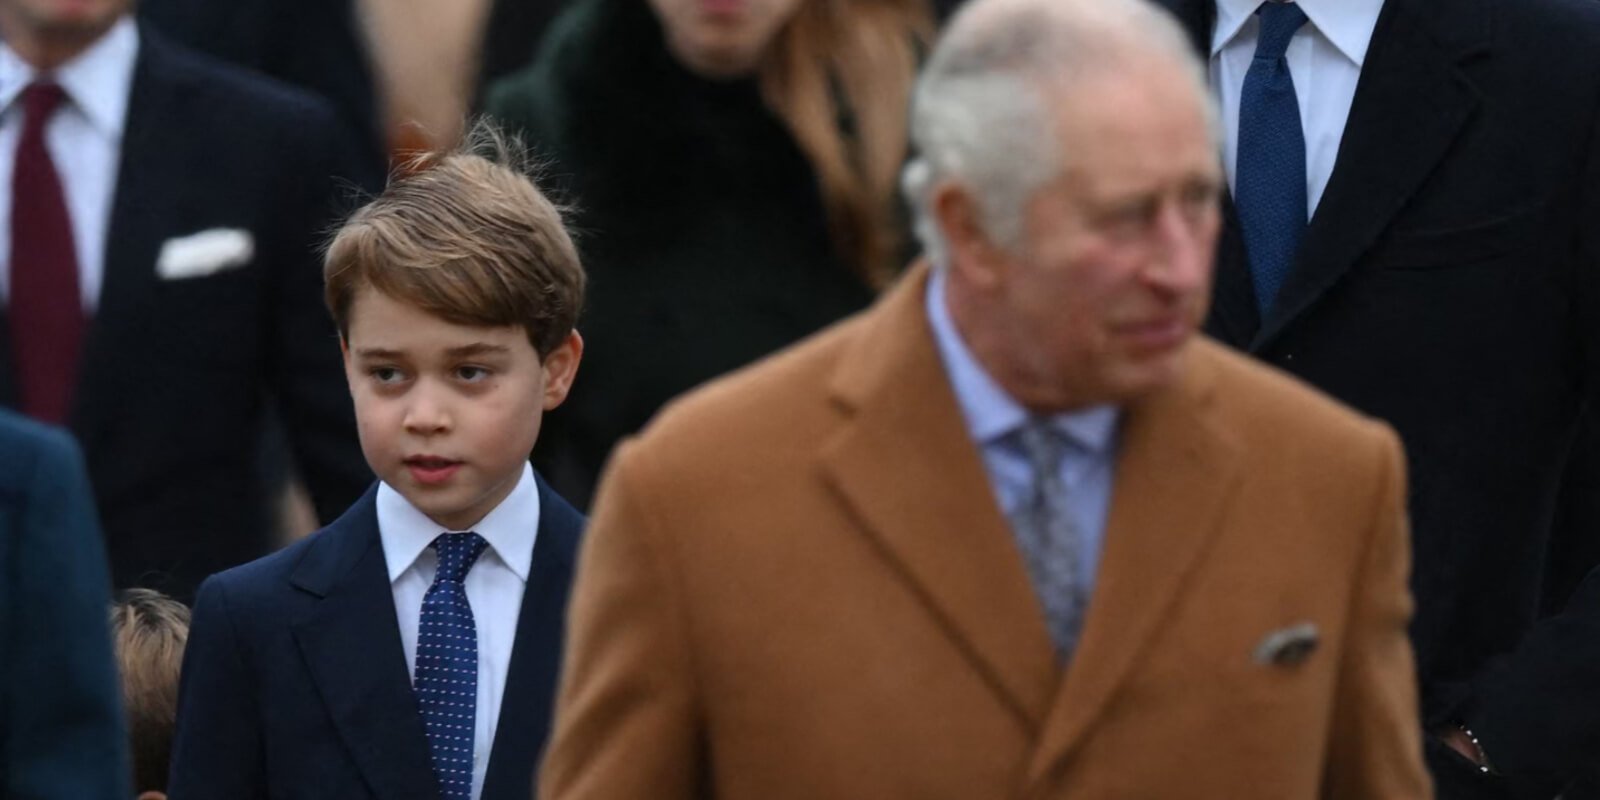 Prince George will play a pivotal role in King Charles III coronation on May 6, 2023.